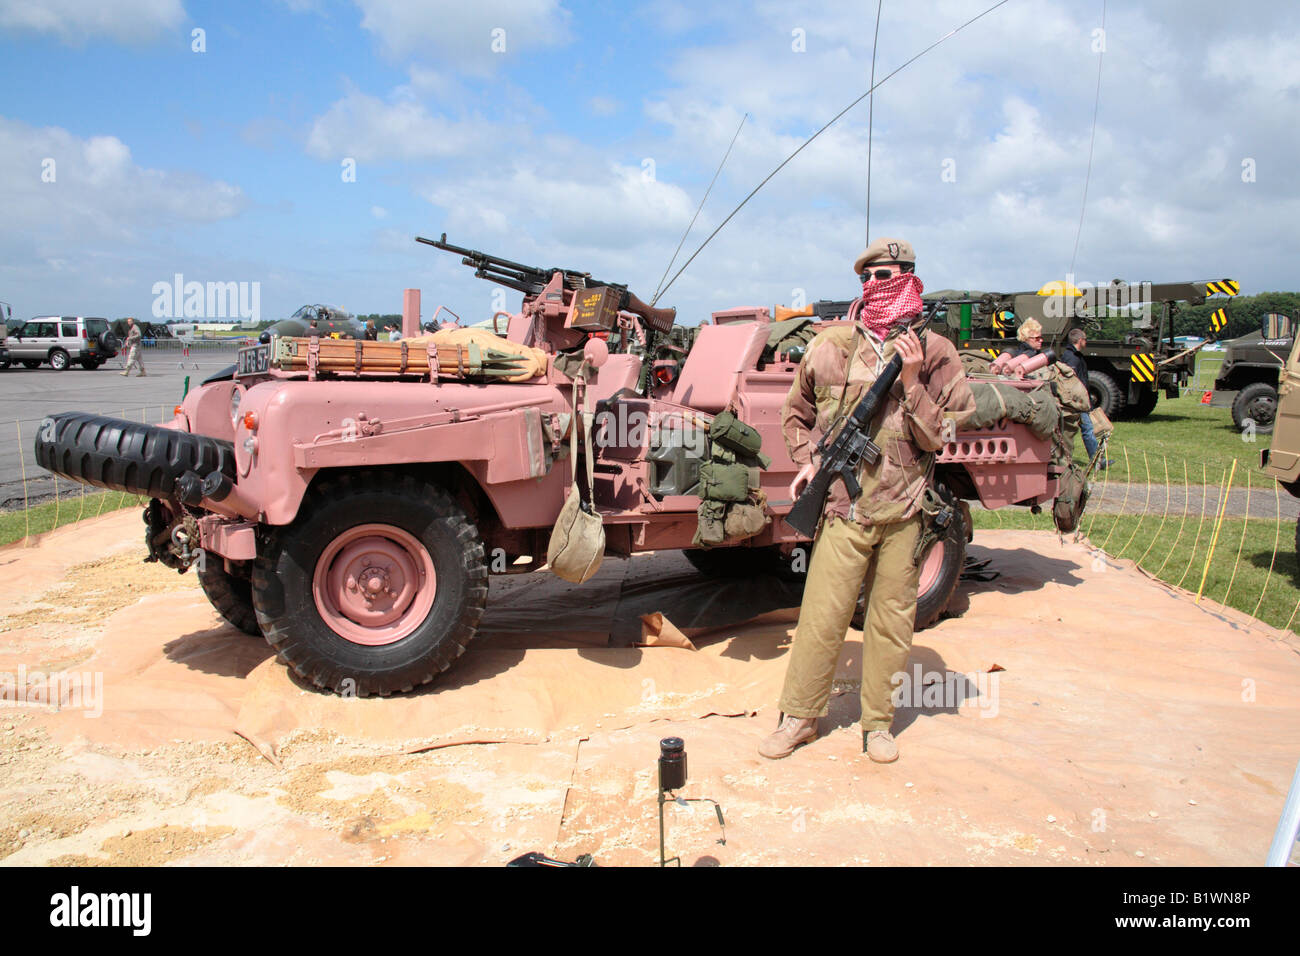 S.A.S. 'pink panther' Land rover Stock Photo - Alamy